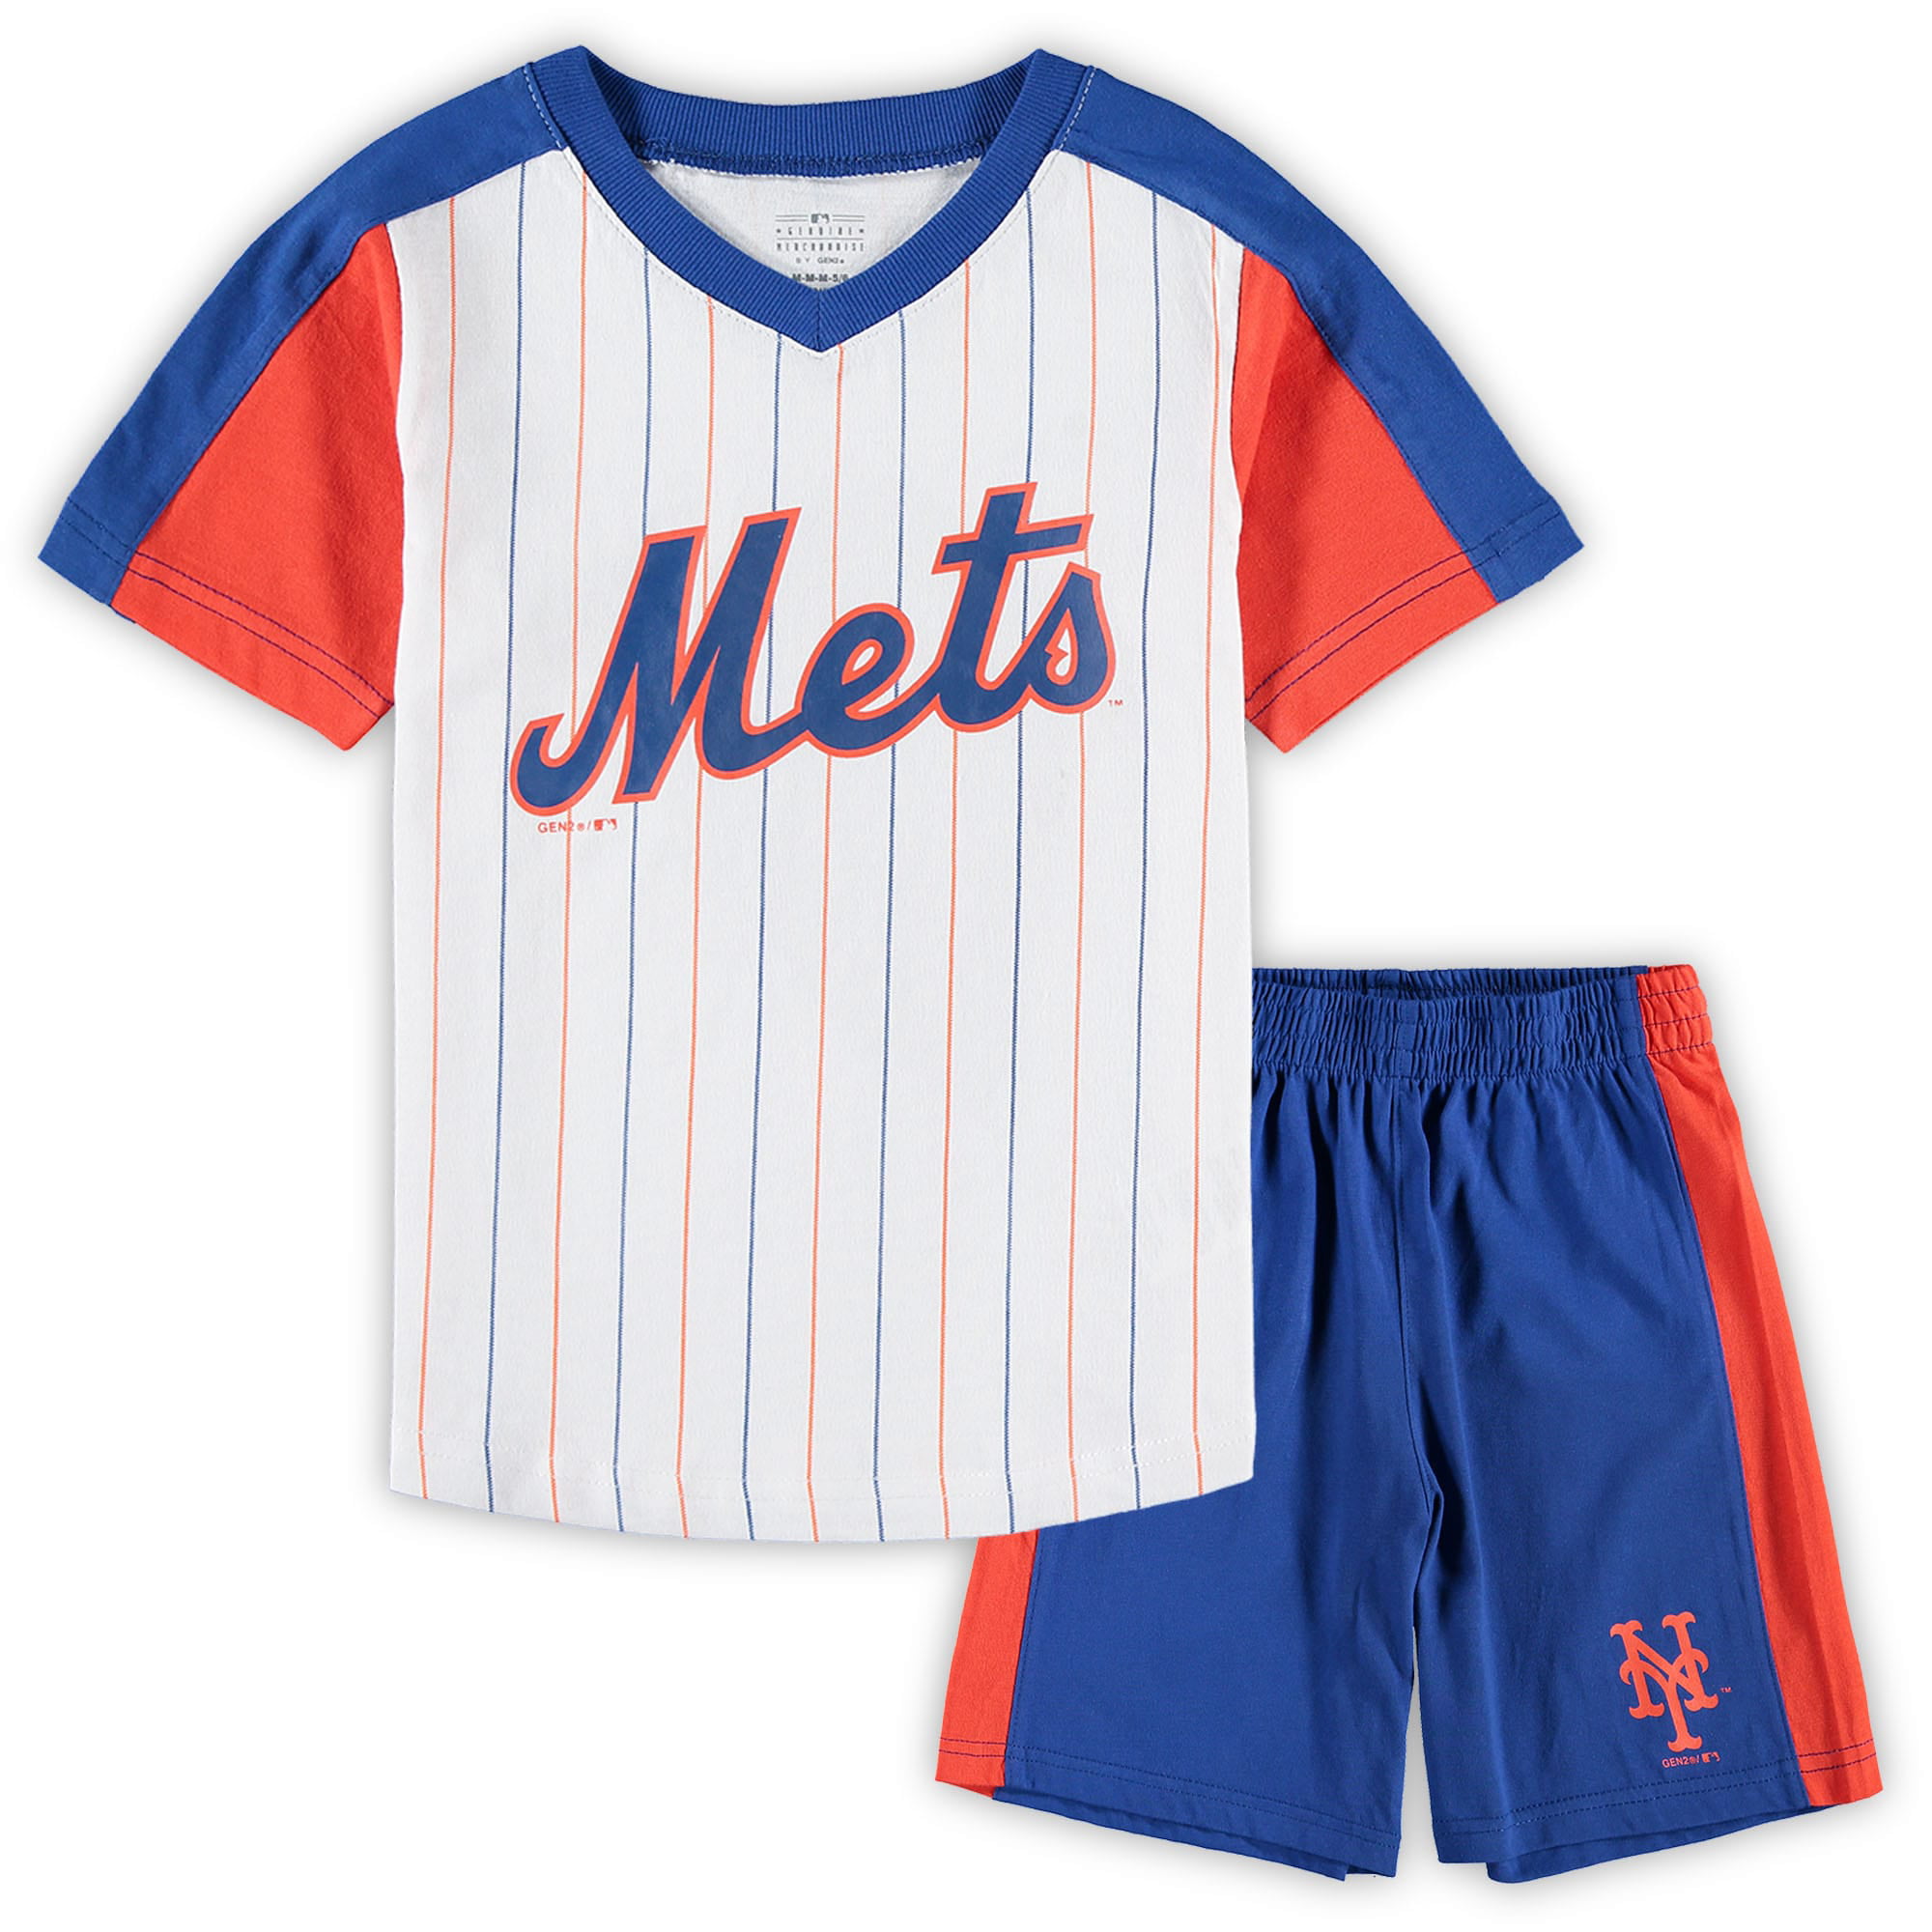 NEW Boys NY New York Mets Shorts Tank Top Shirt Set Outfit Size 2T 2 T Toddler 